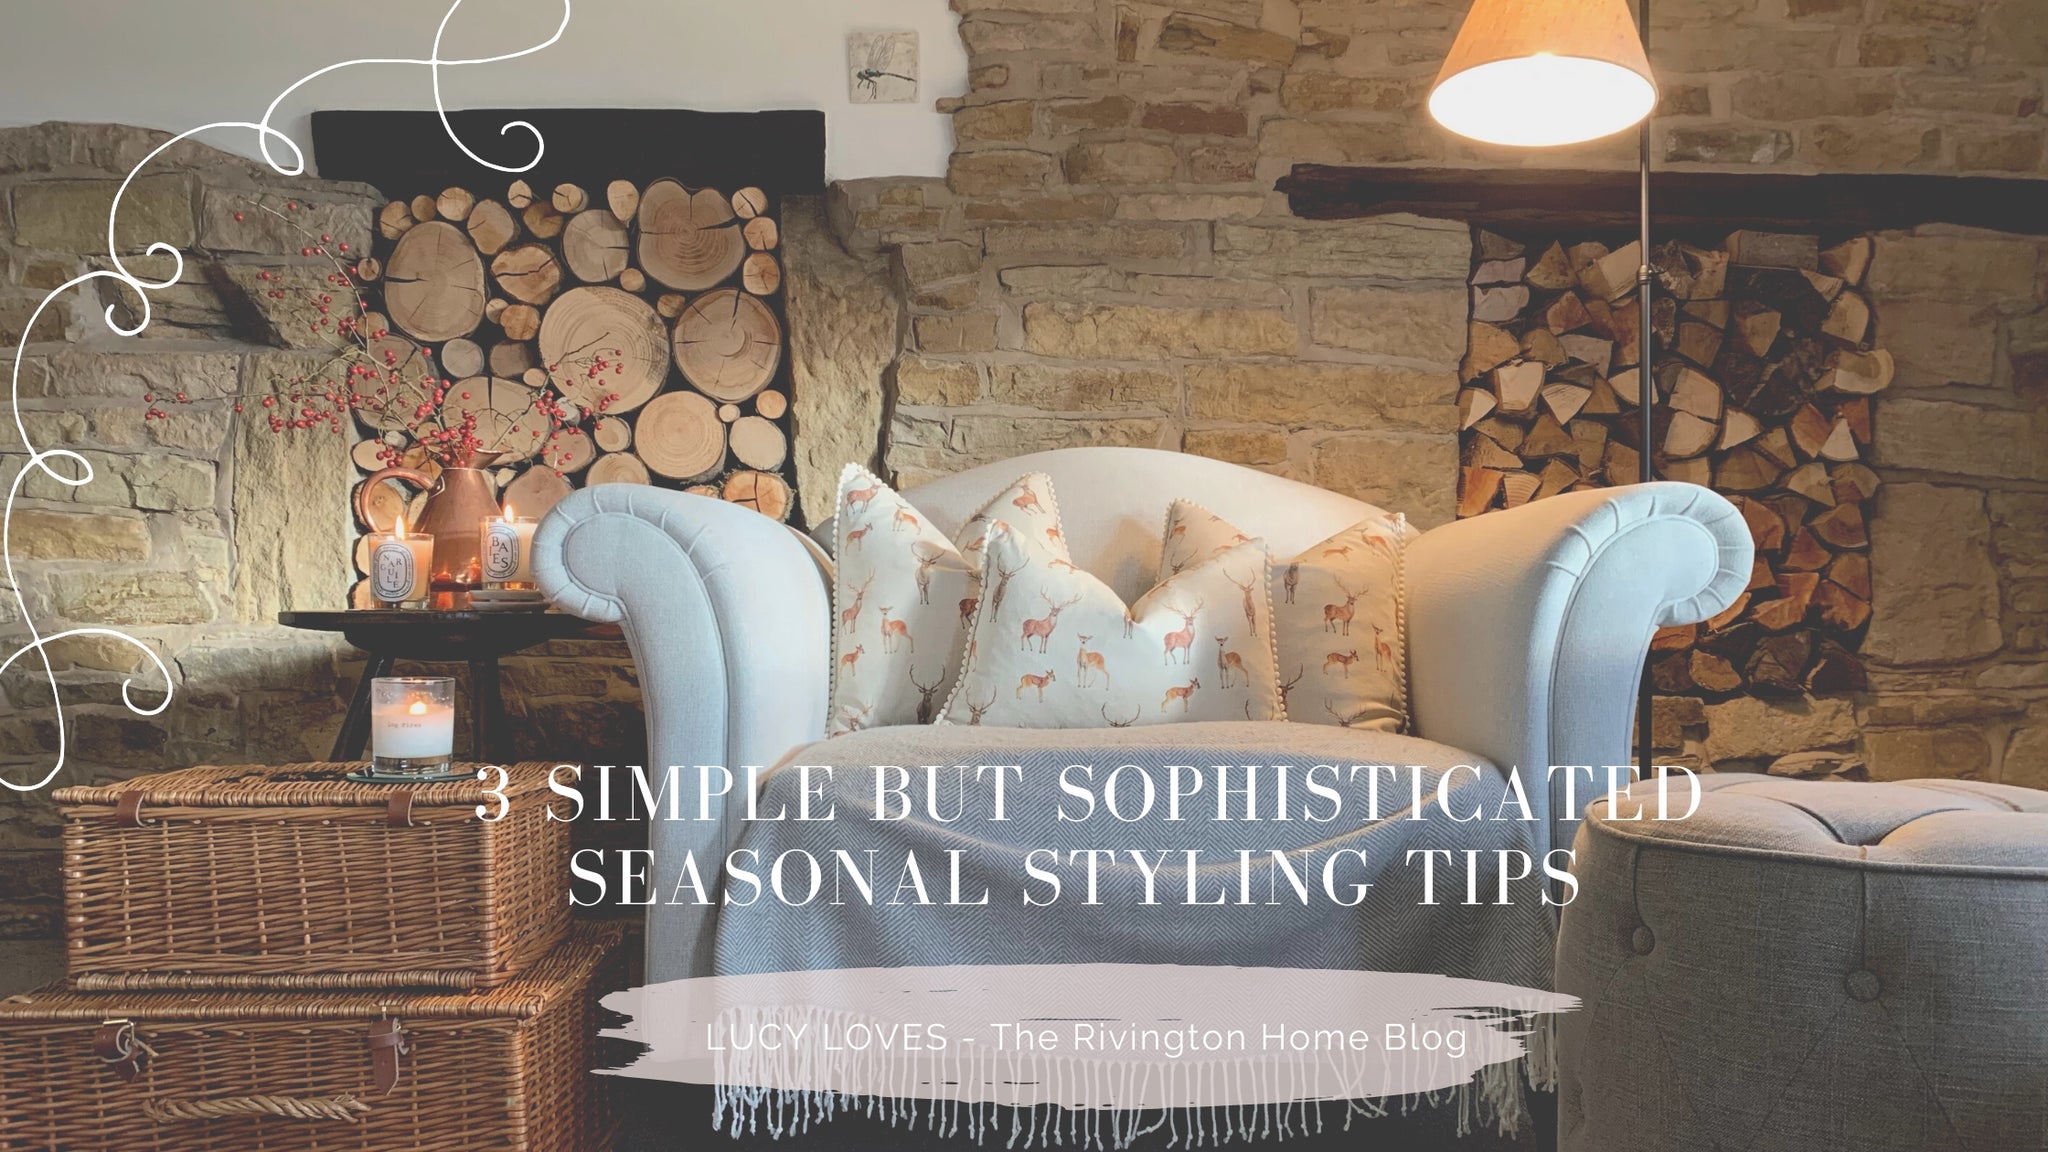 Seasonal home styling tips for Autumn